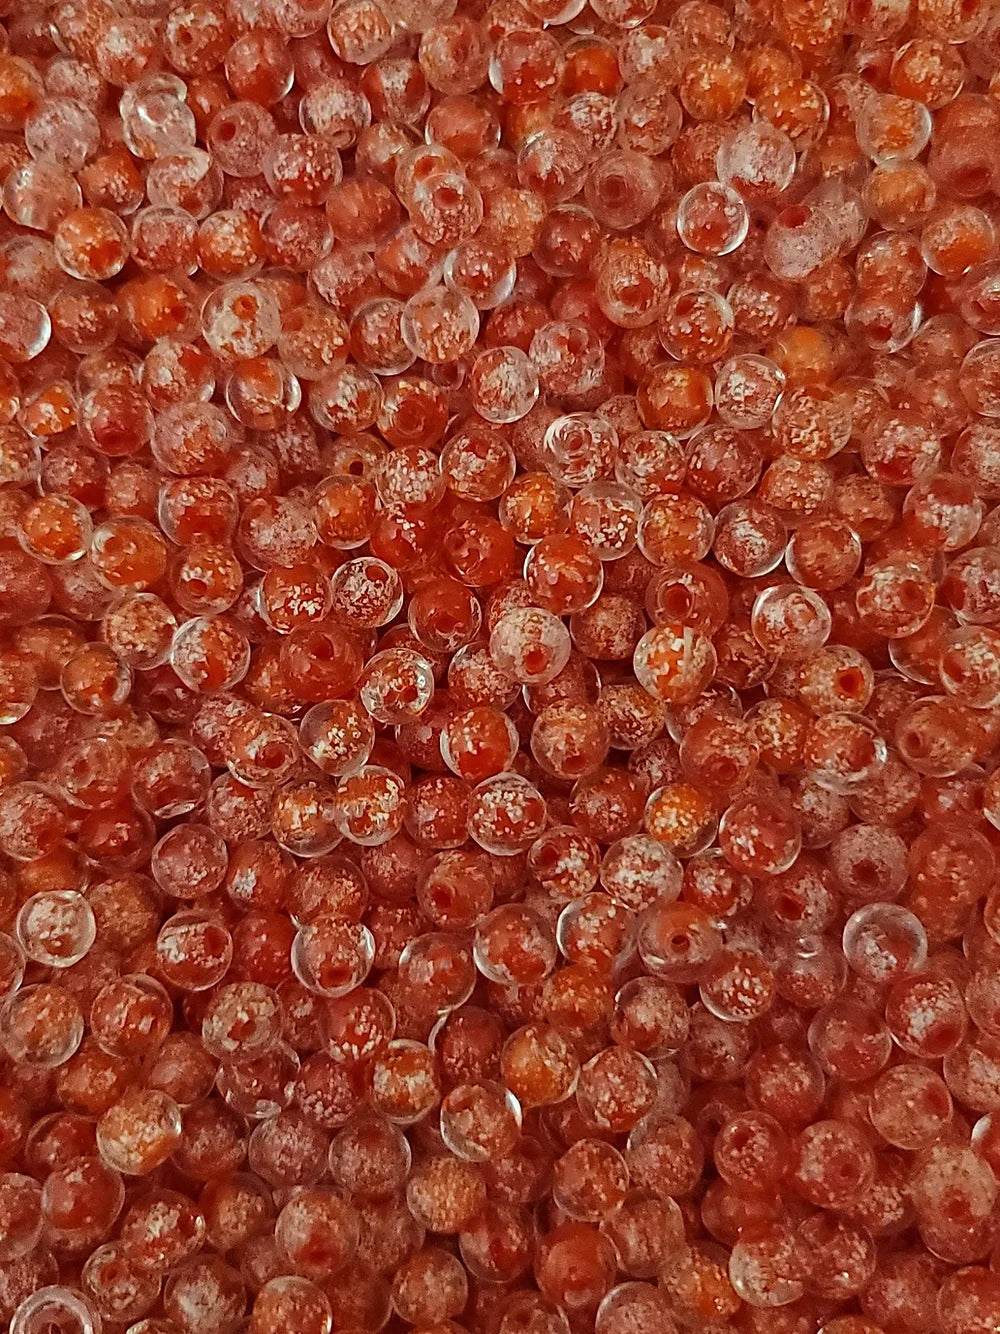 Creek Candy Bead Co. Glass Beads (8mm) 8mm / Fuzzy Bubble Gum